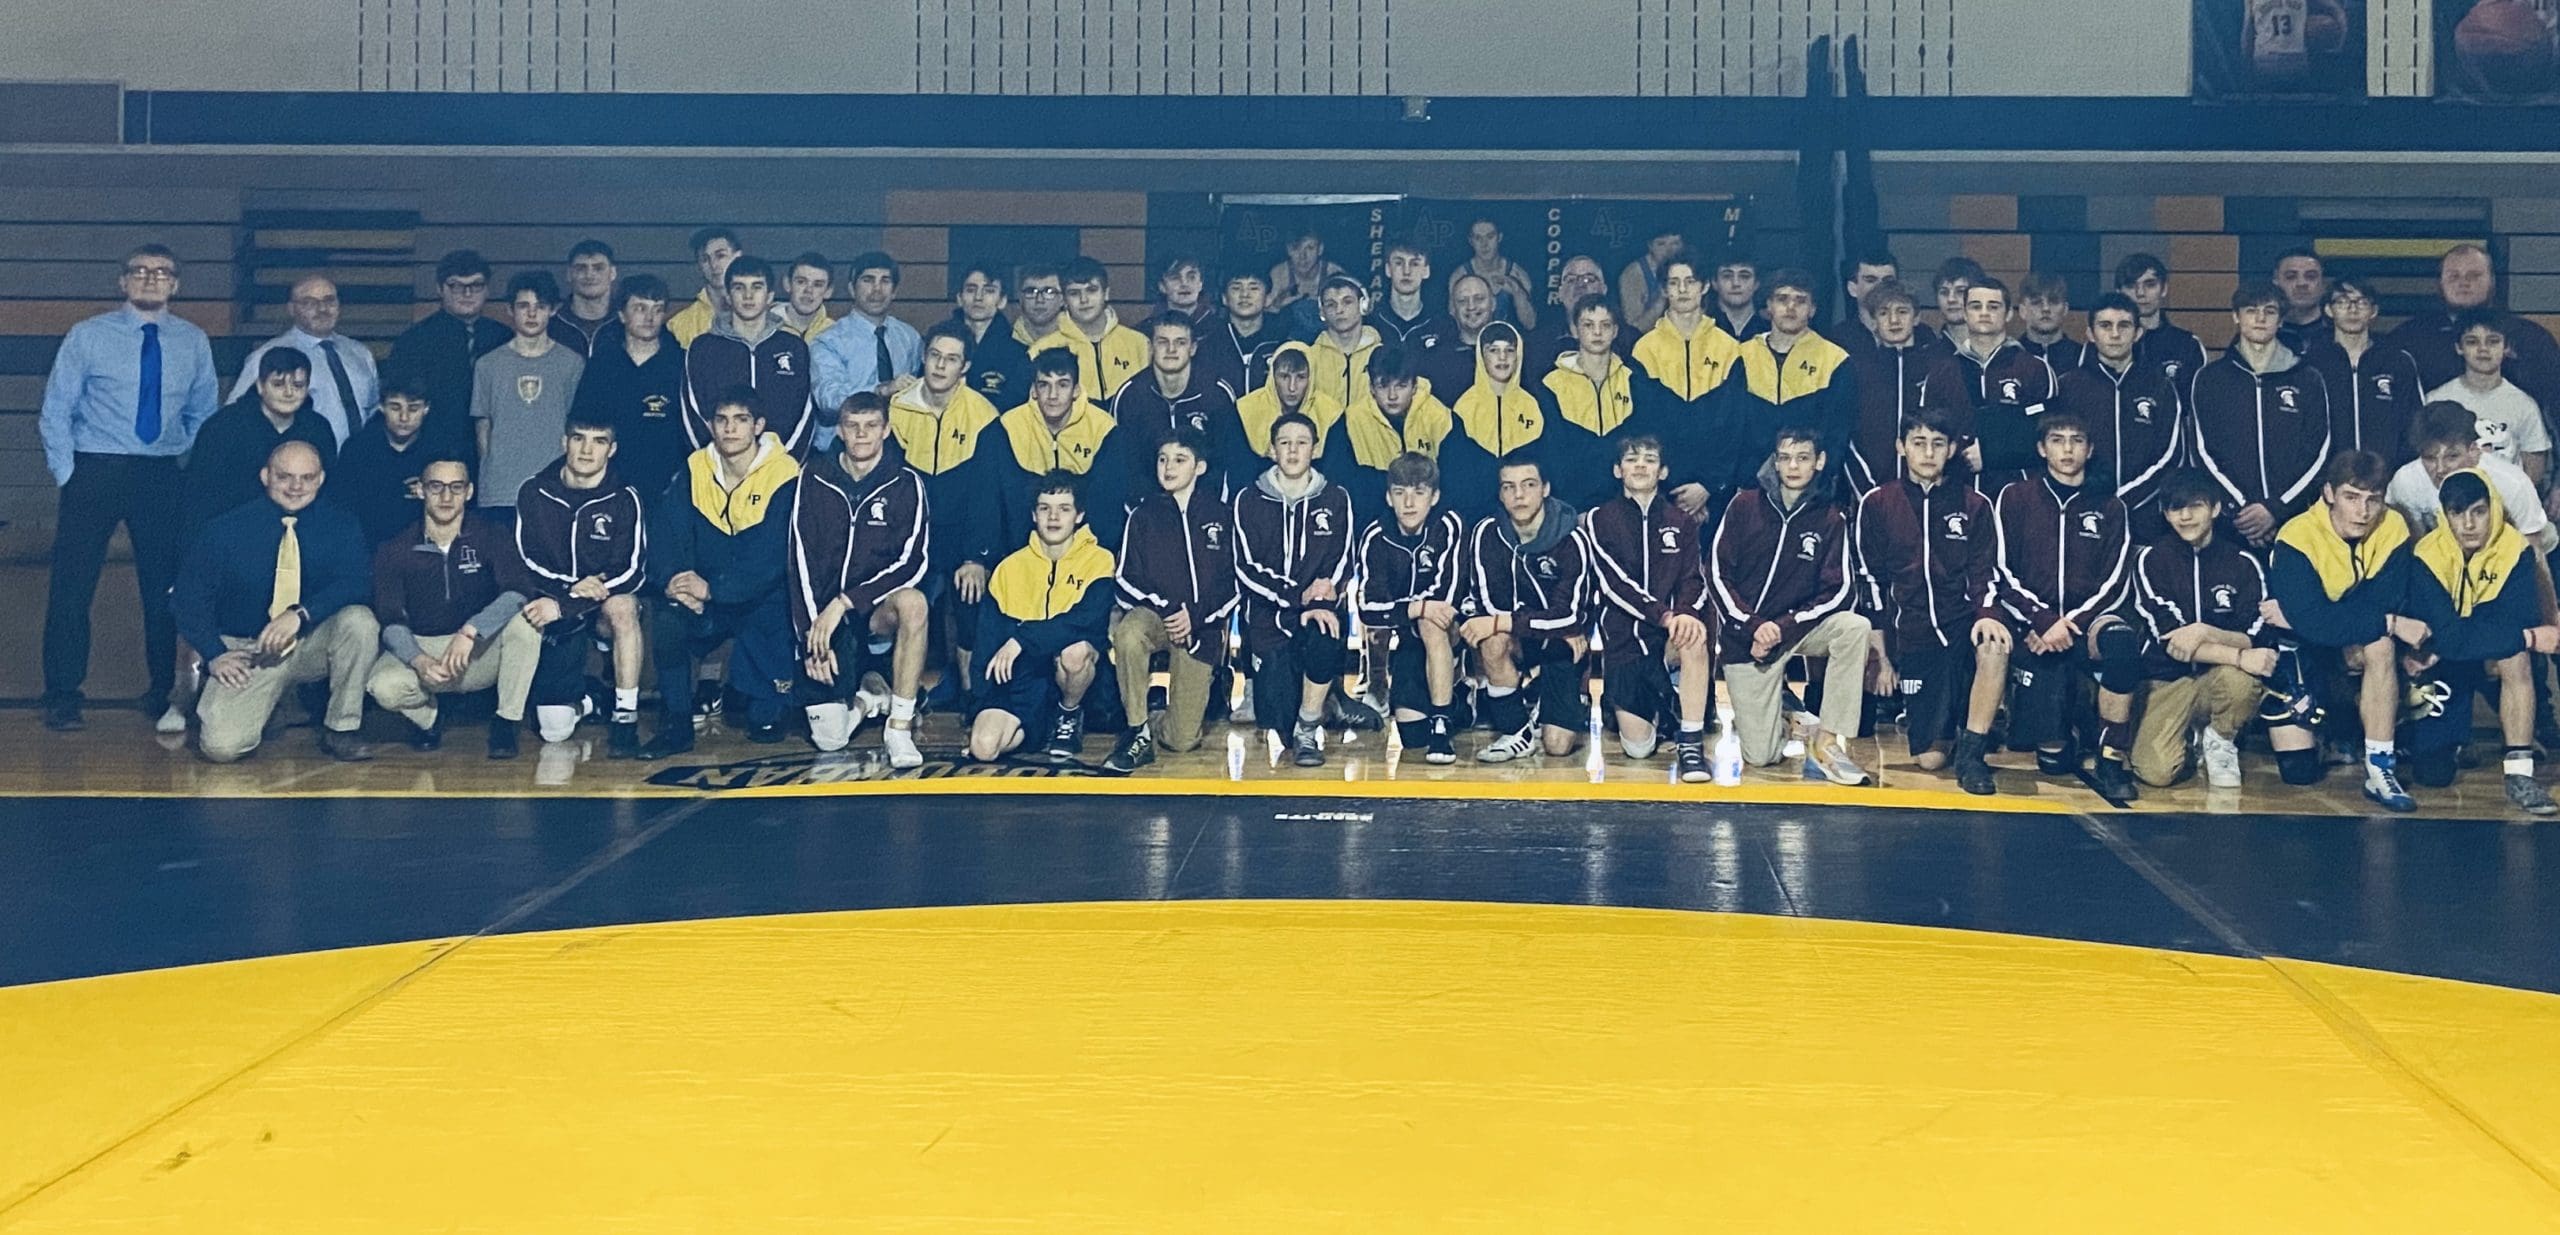 group photo of wrestling teams